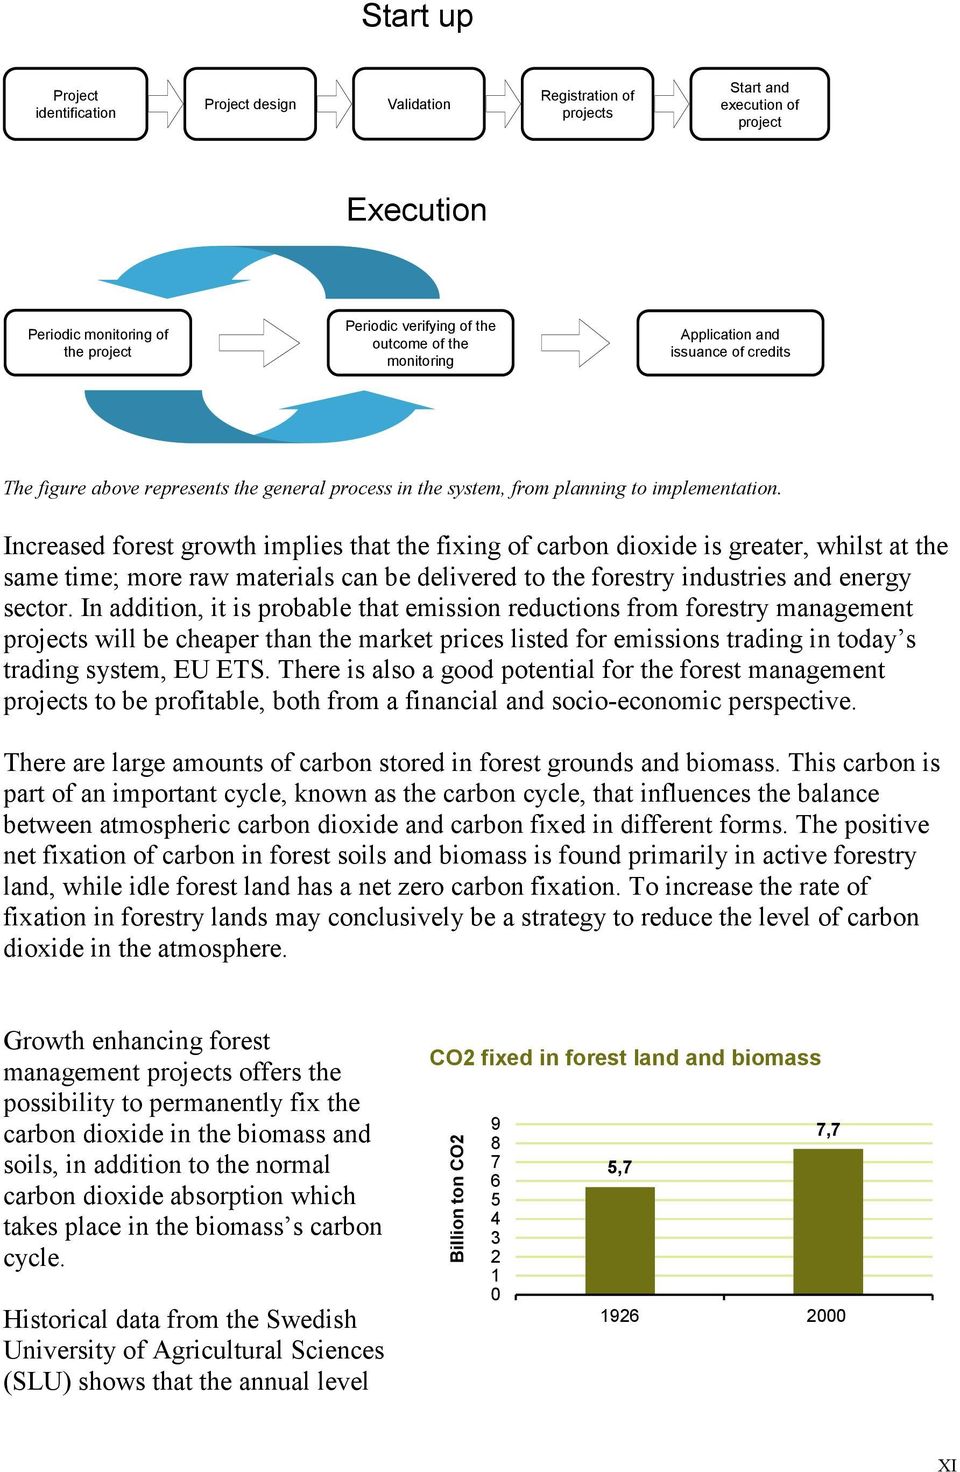 Increased forest growth implies that the fixing of carbon dioxide is greater, whilst at the same time; more raw materials can be delivered to the forestry industries and energy sector.